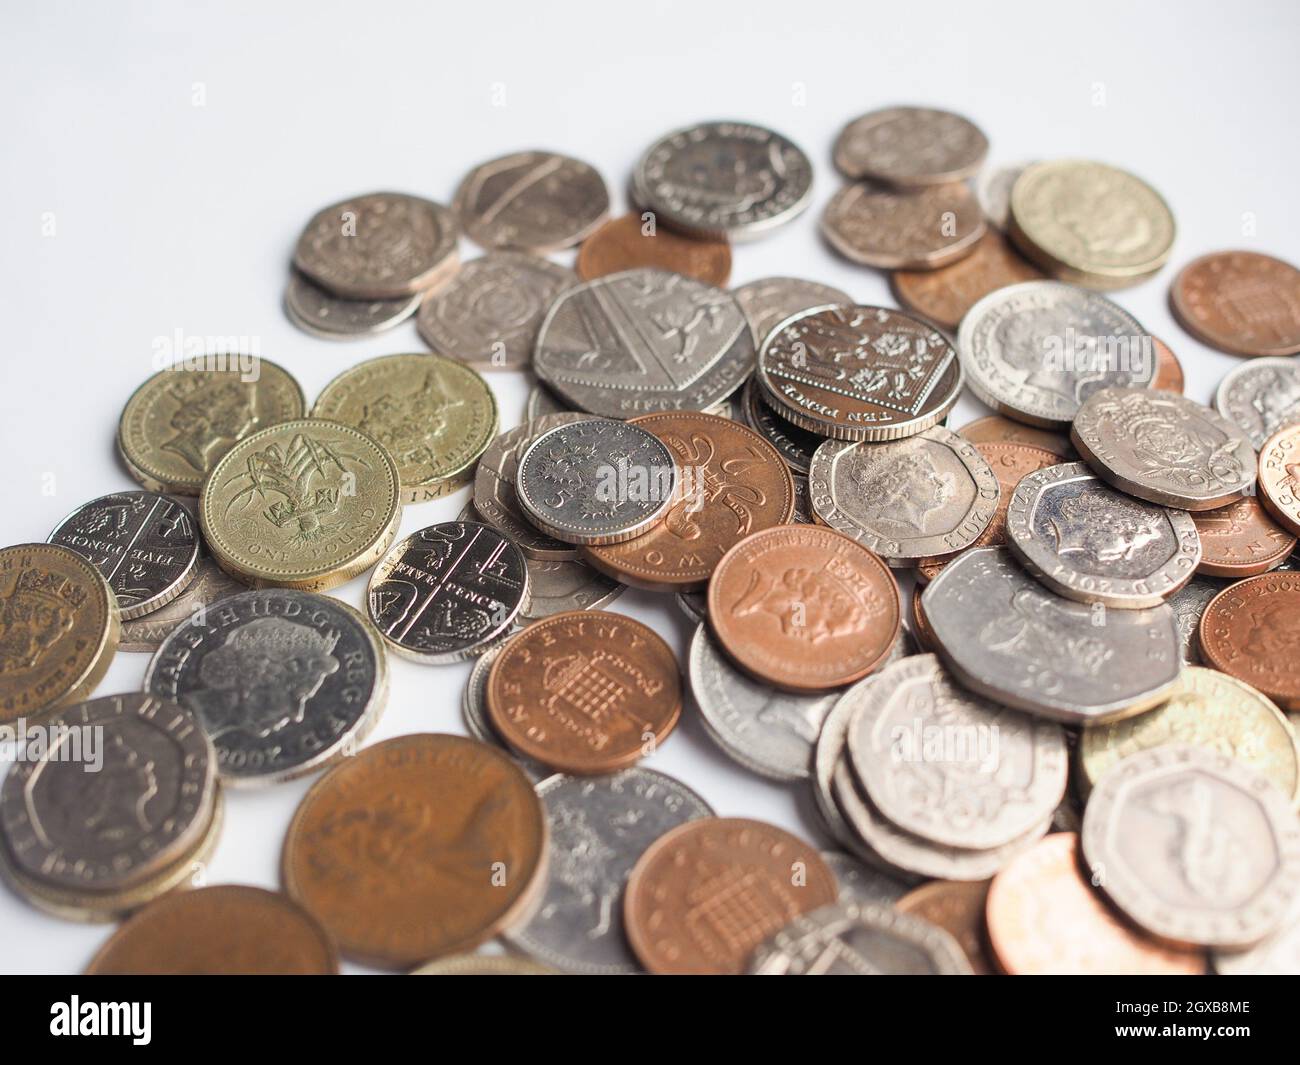 Pound coins money (GBP), currency of United Kingdom. Stock Photo